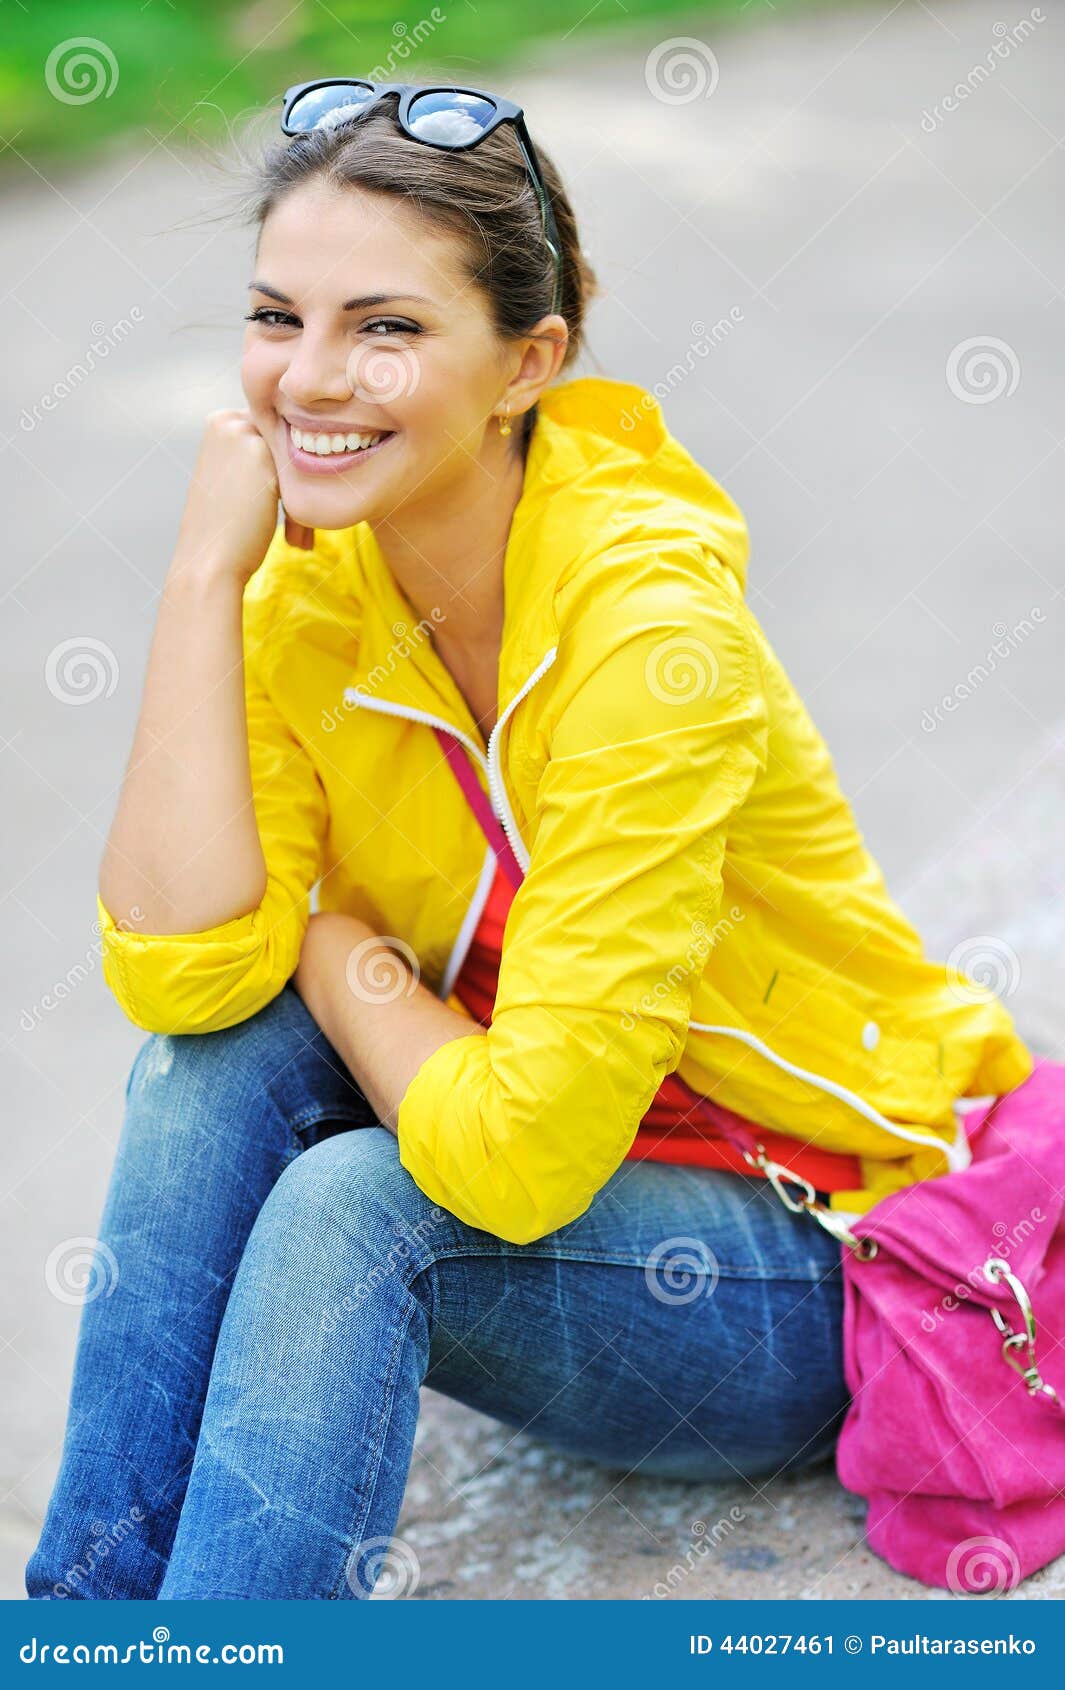 Fashion Girl Portrait. Beautiful Happy Woman in Colorful Clothes Stock ...